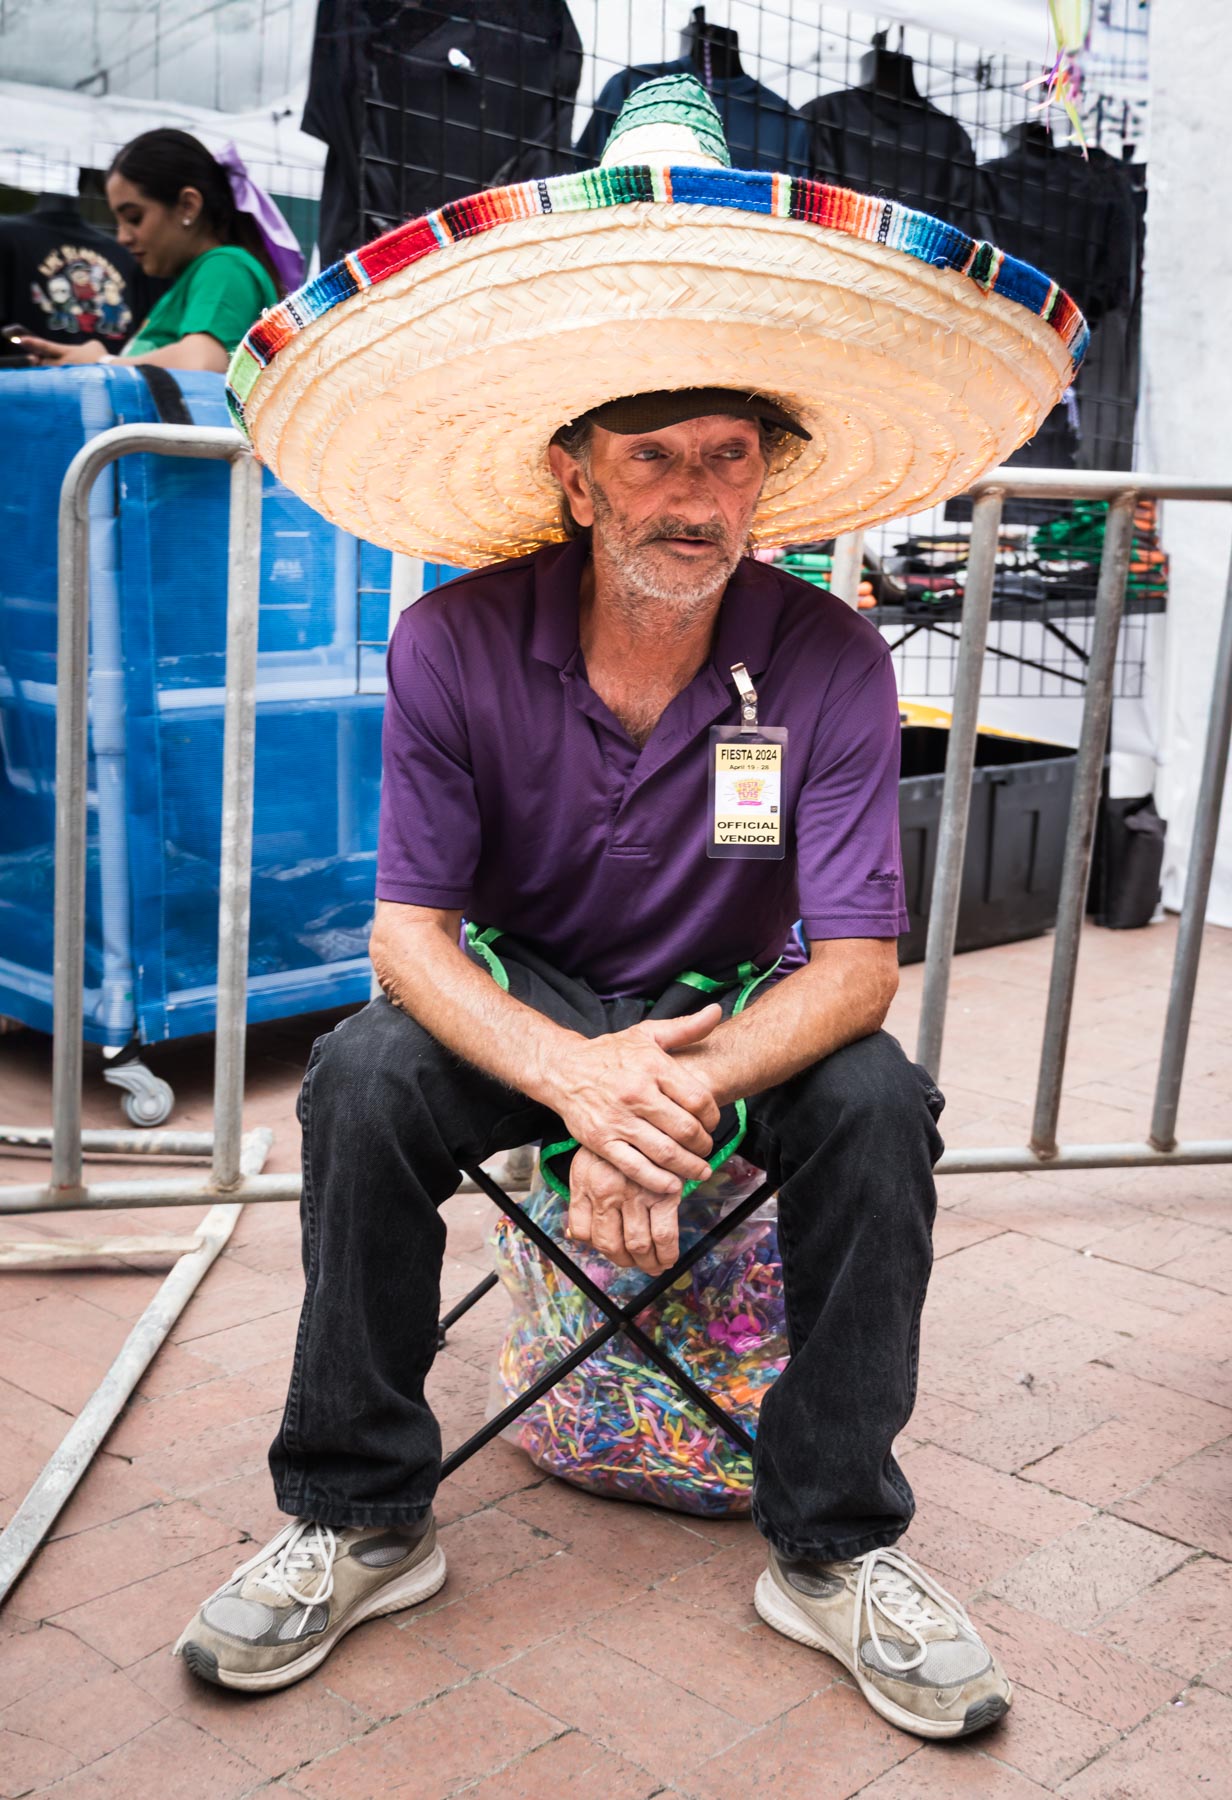 Man sitting wearing purple shirt and large sombrero for an article on the Fiesta photo tips